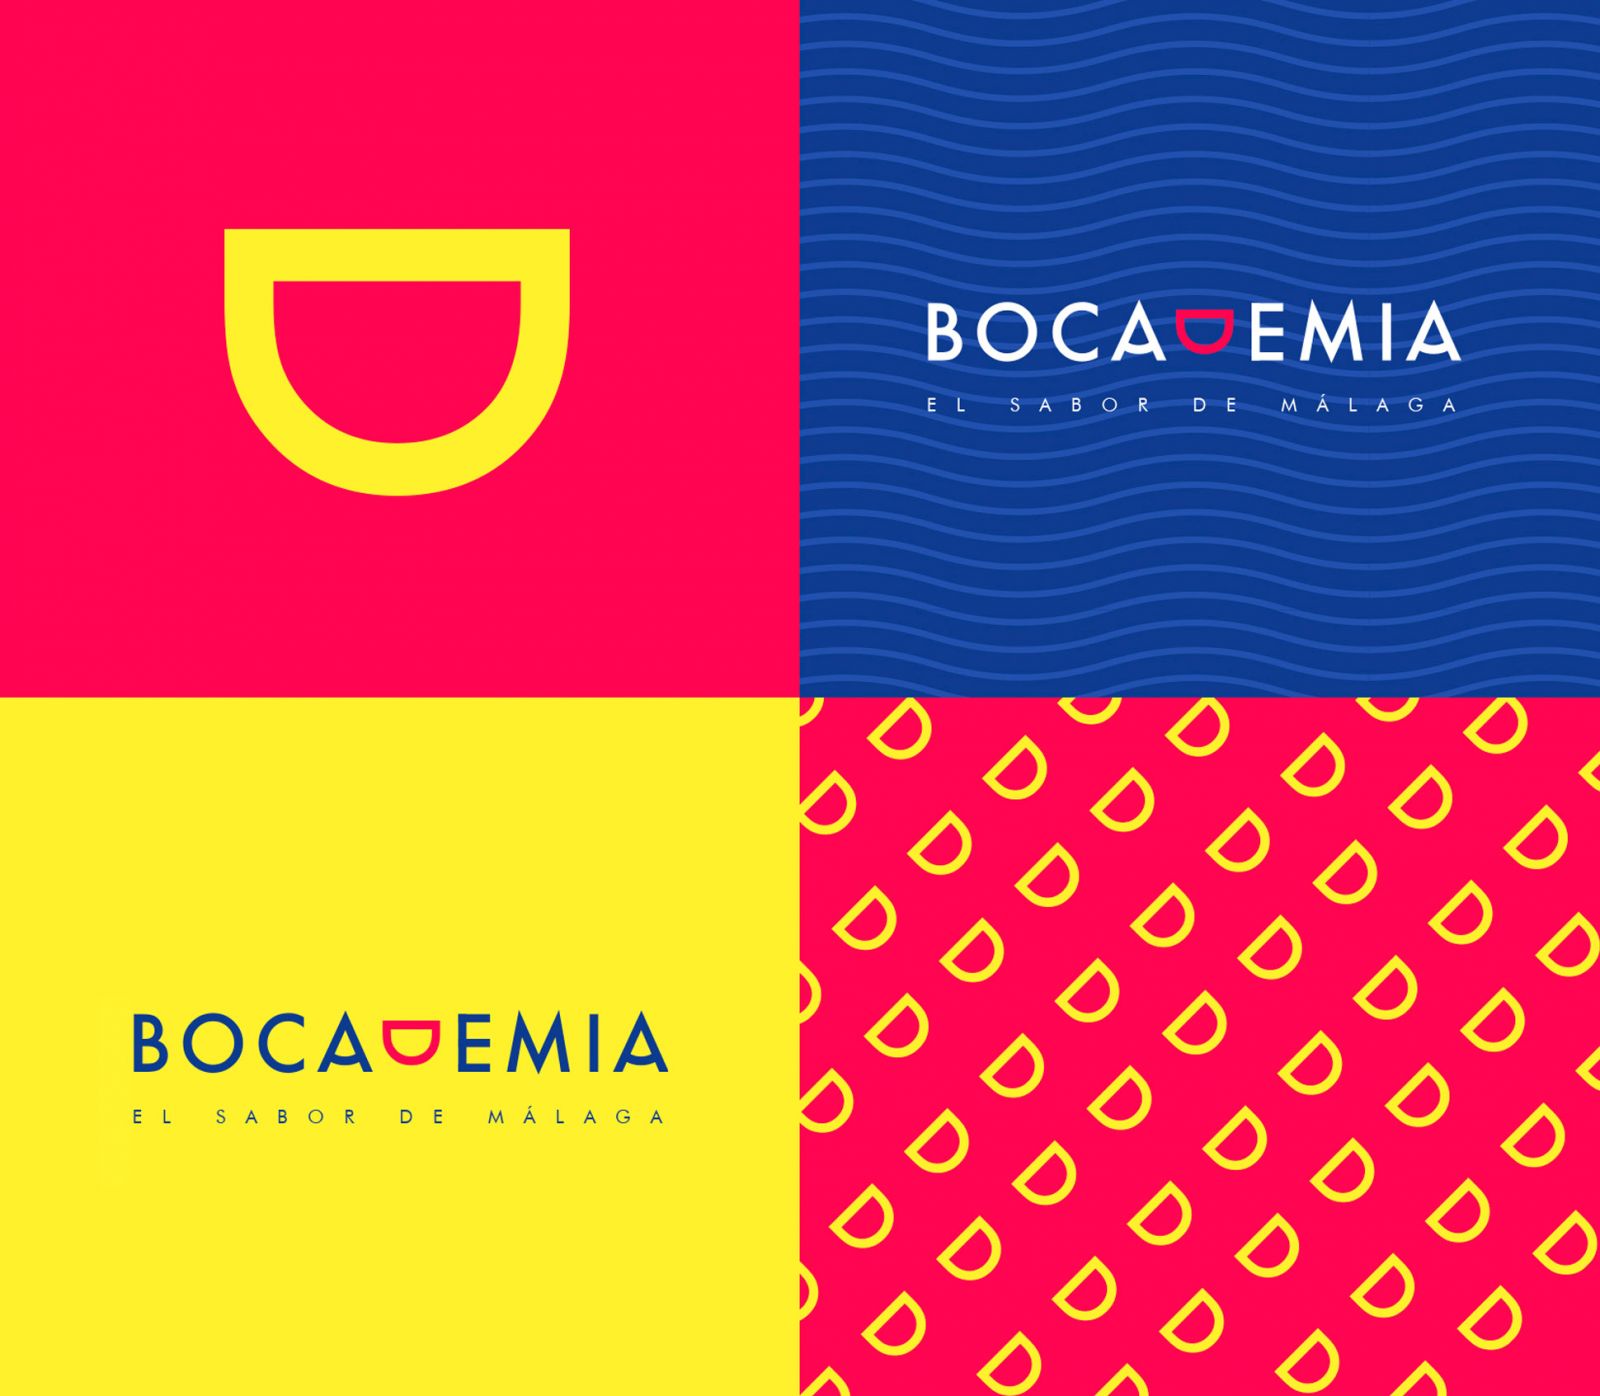 Visual identity and branding, what's the difference?